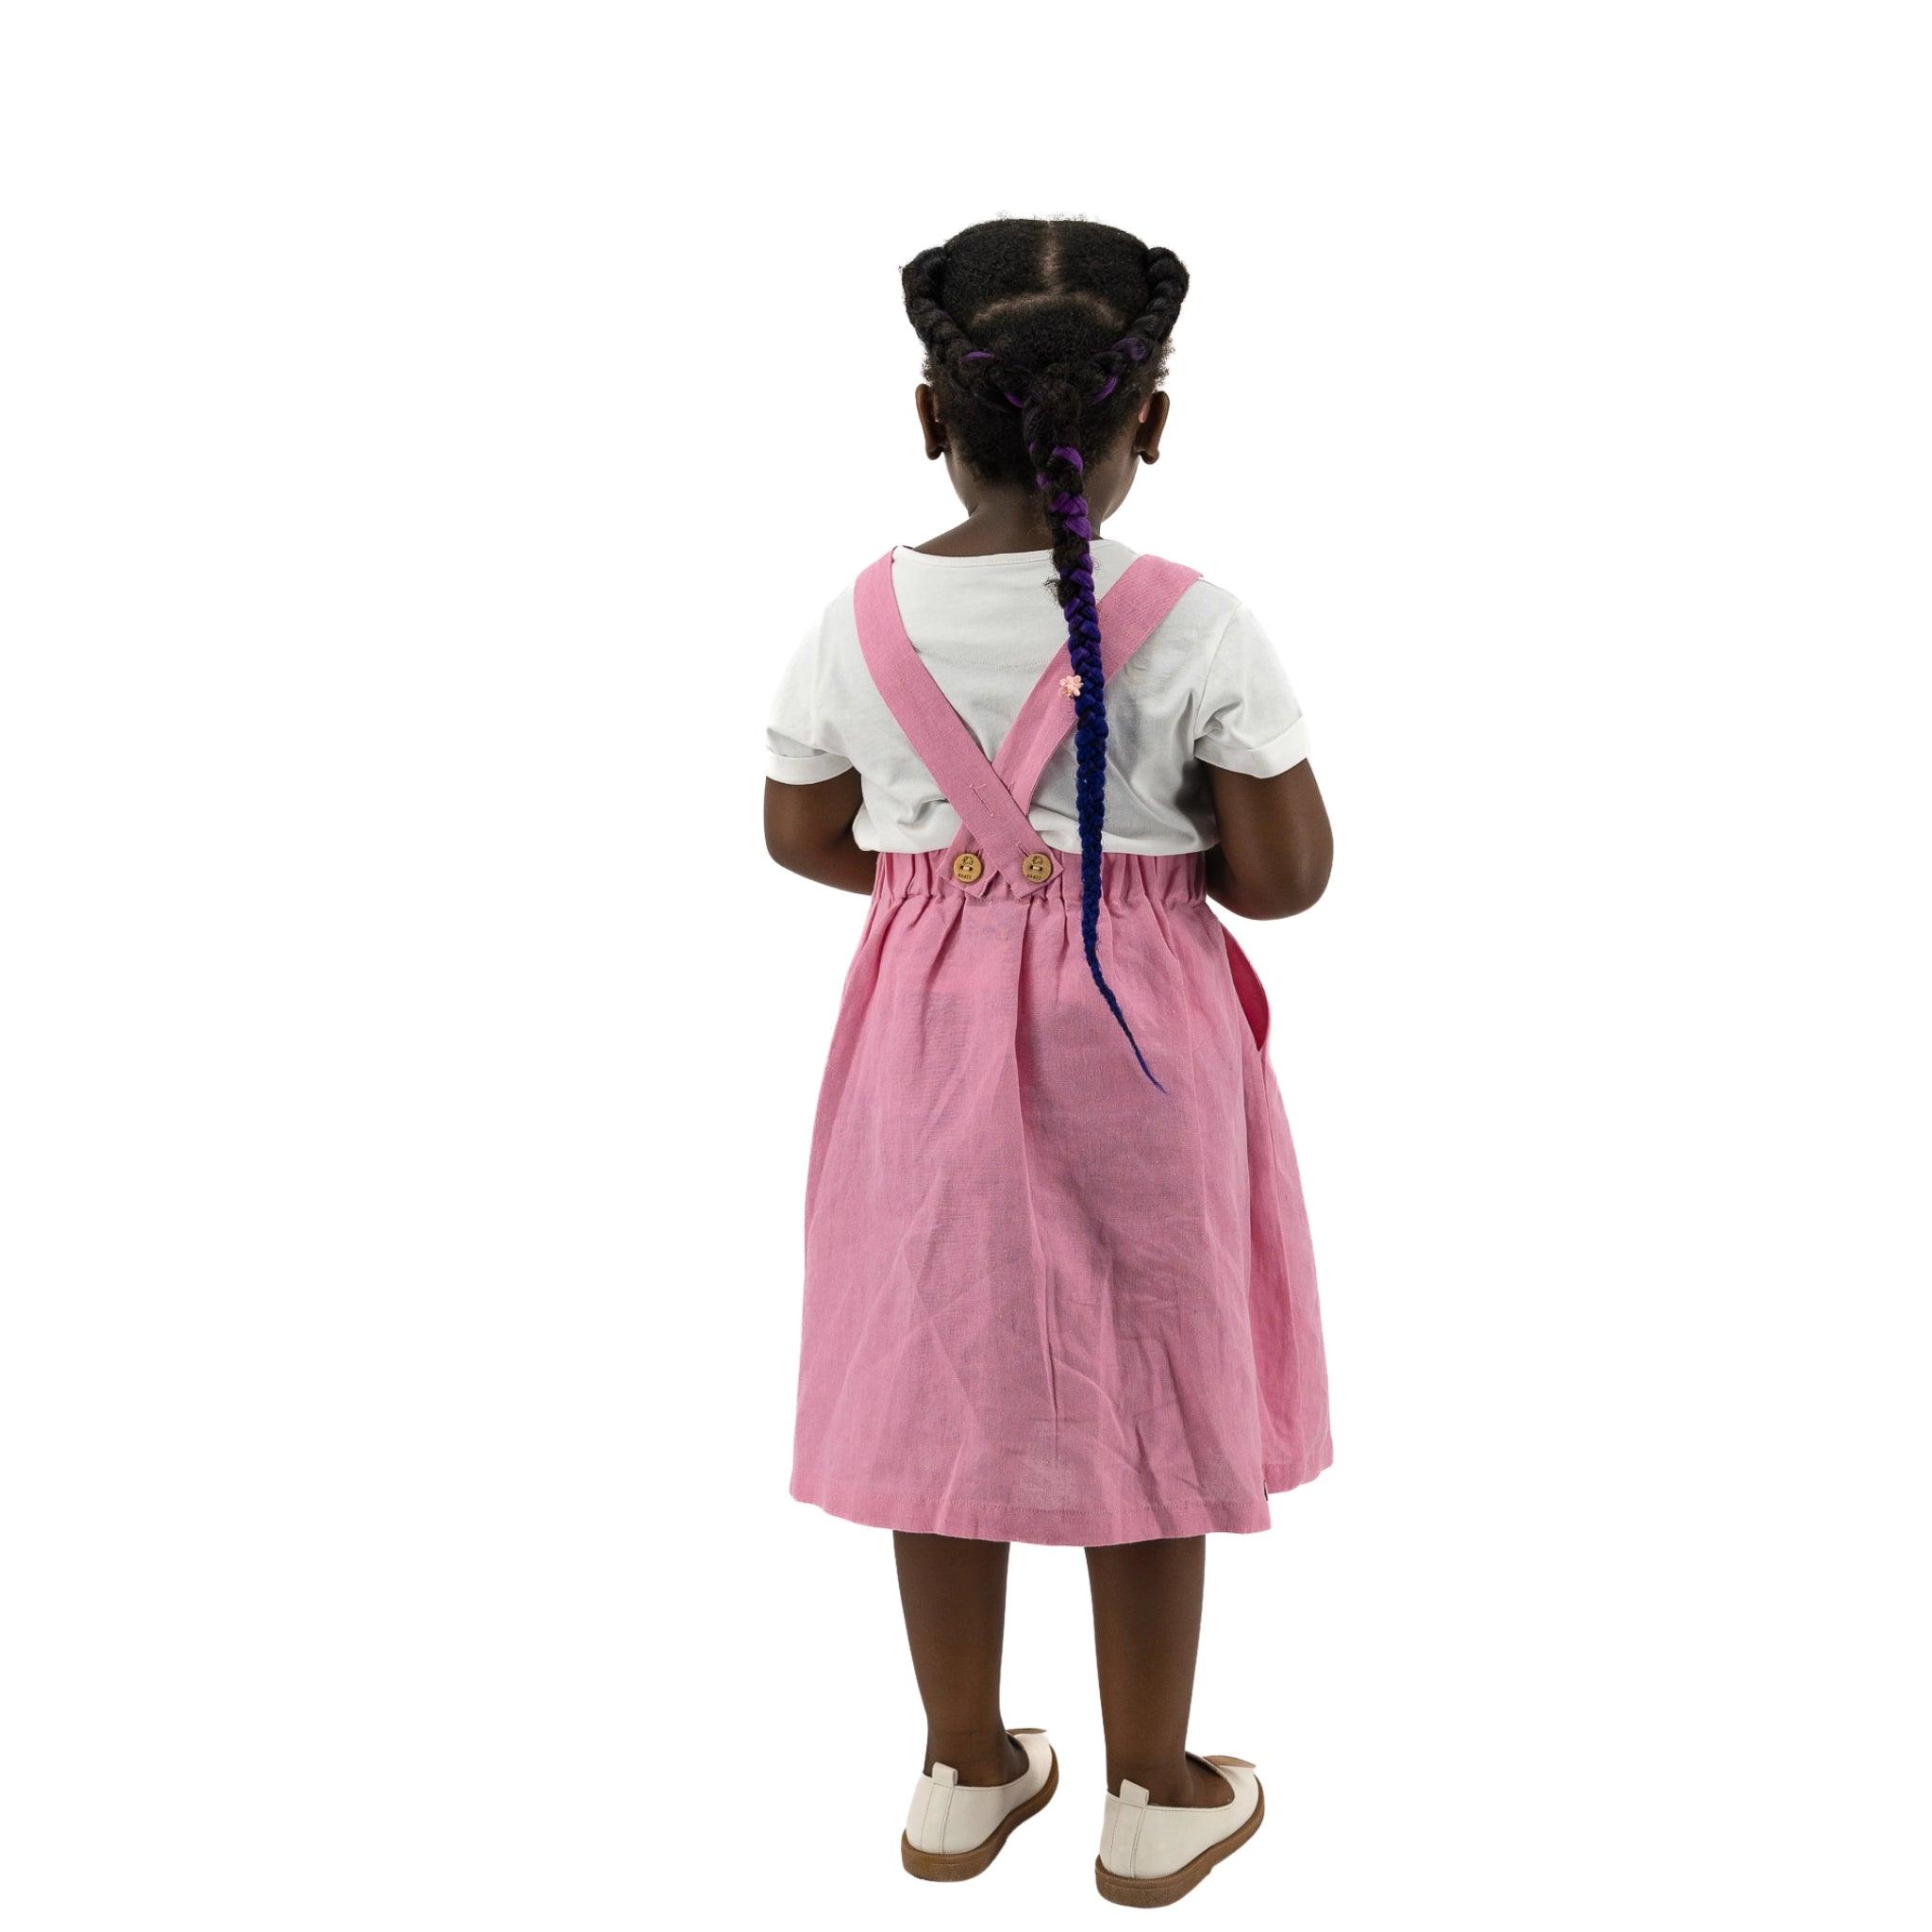 Young girl standing with her back to the camera, wearing a Karee Cashmere Rose Linen Pinafore with a white blouse, and white shoes. Her hair is styled in braids.